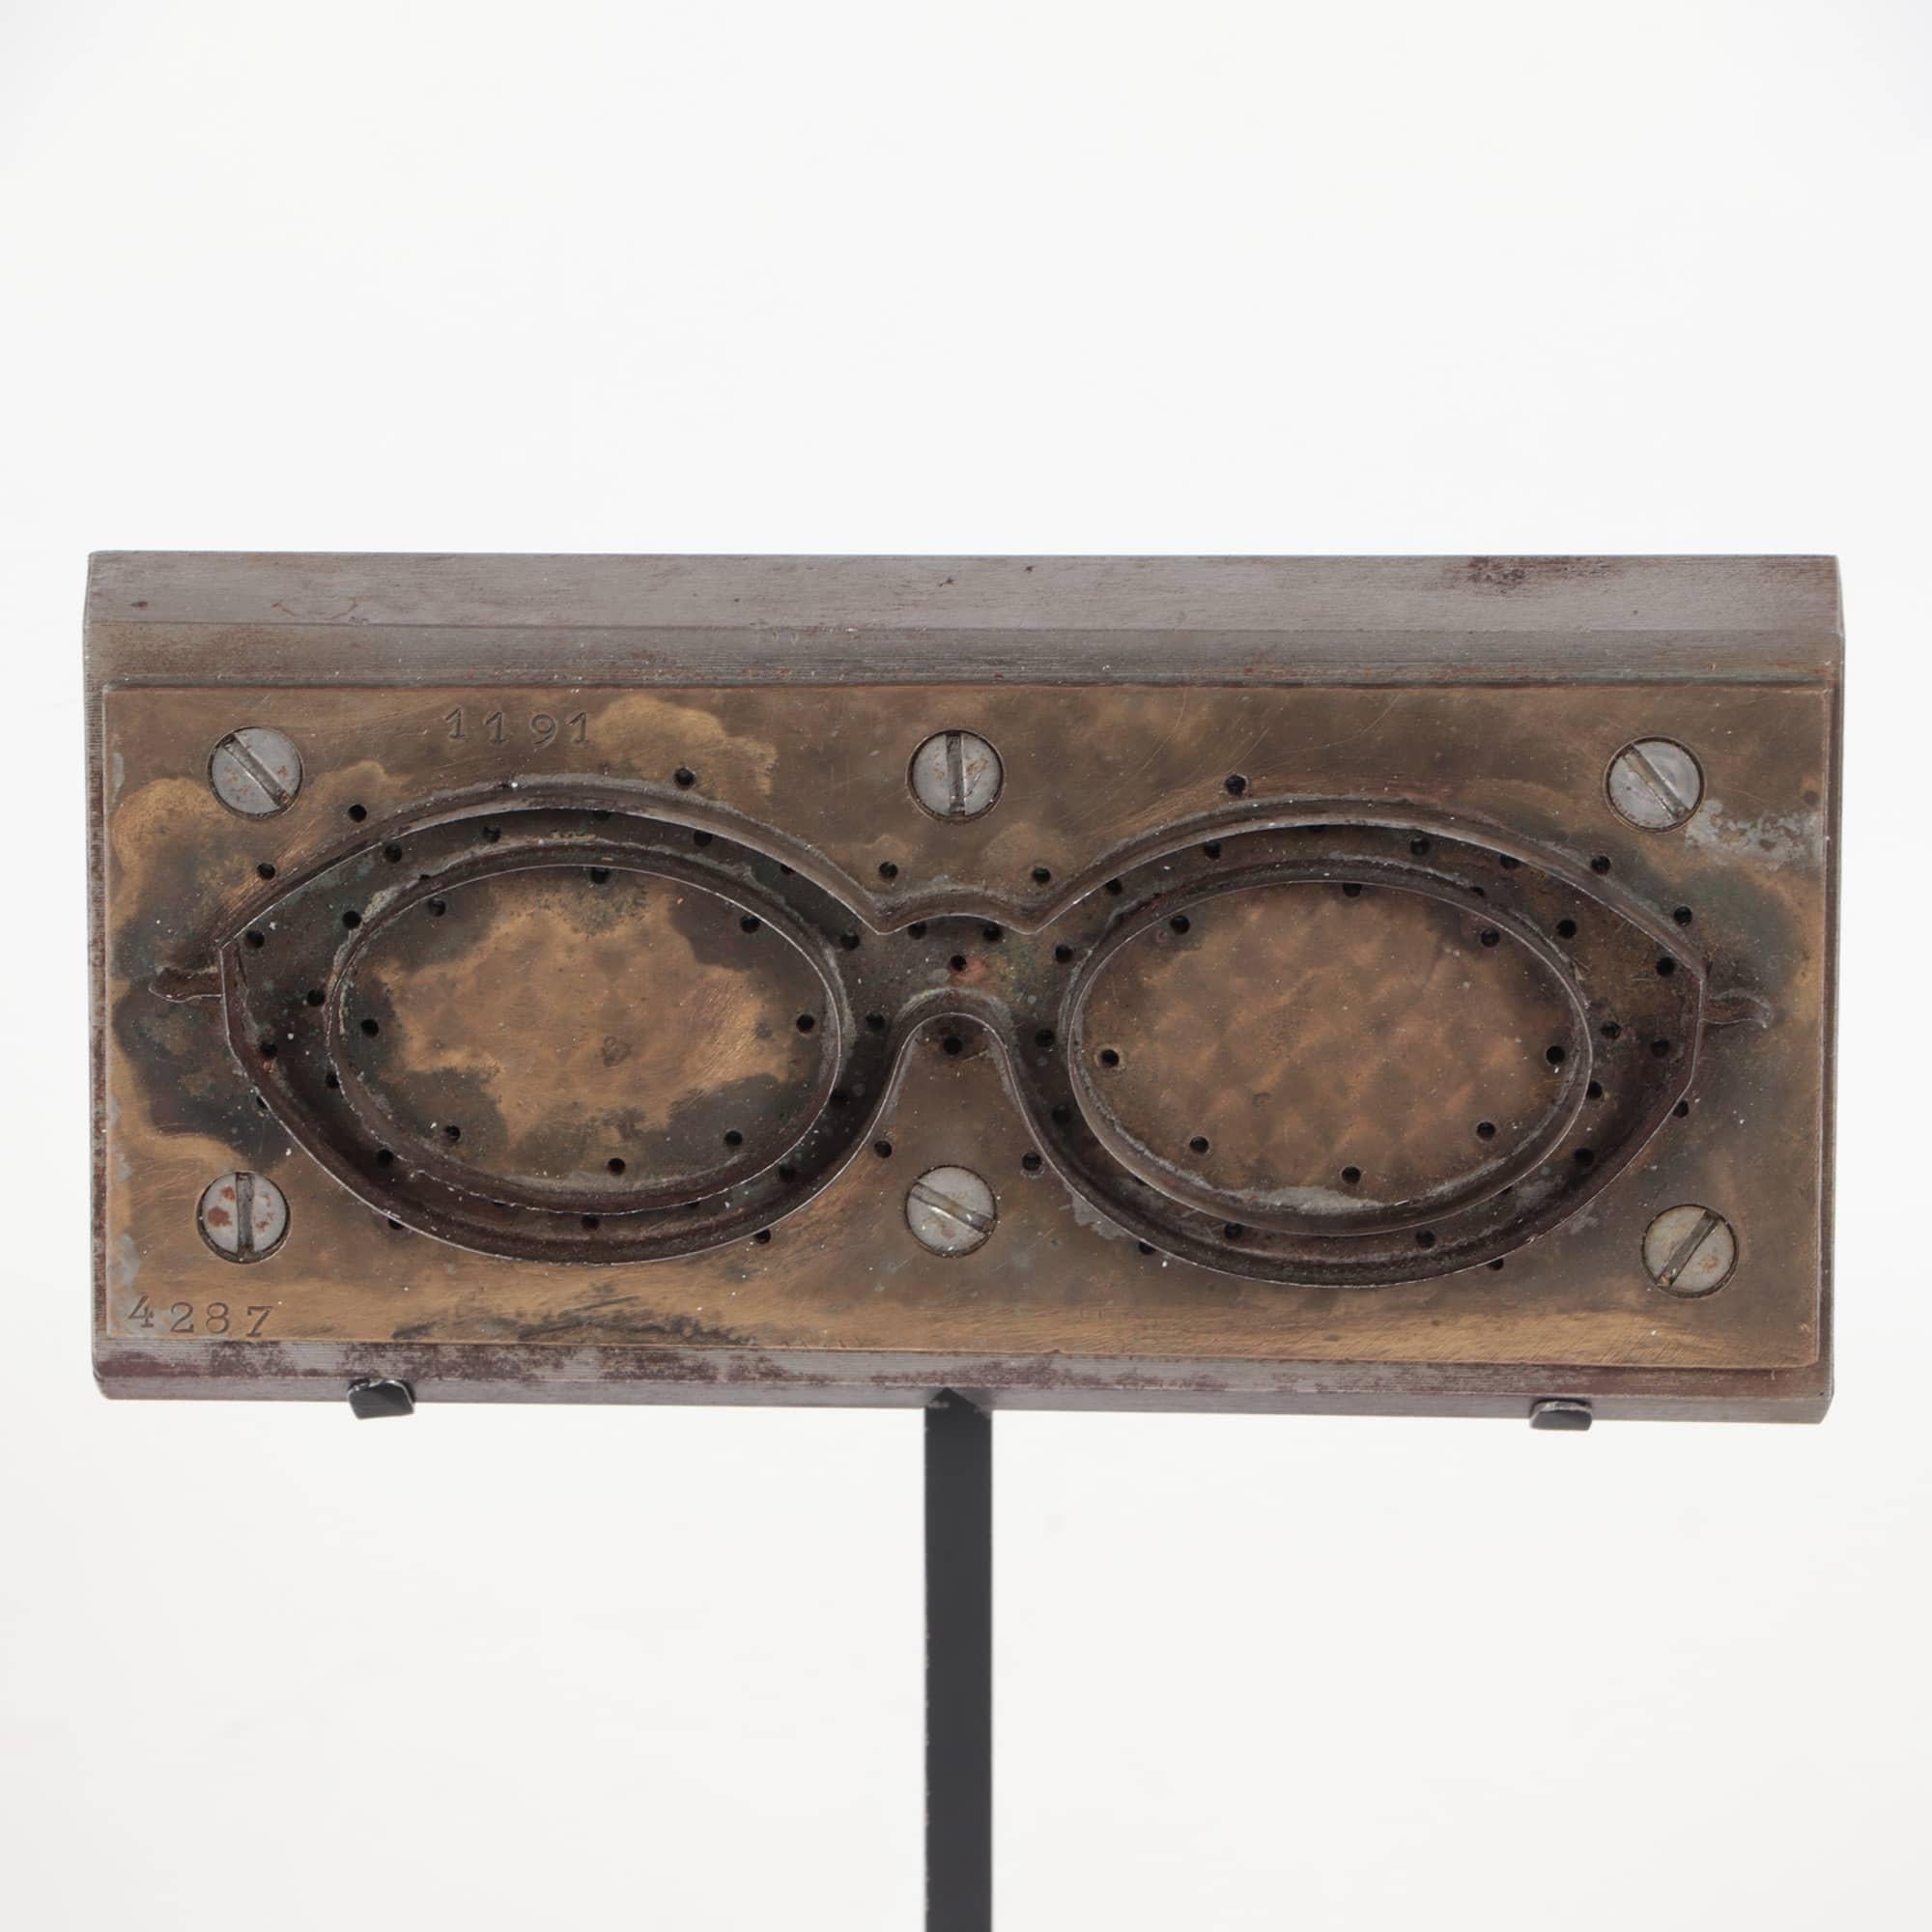 A Mid-Century Modern French steel and brass eyeglasses mold on a custom iron base, circa 1950.